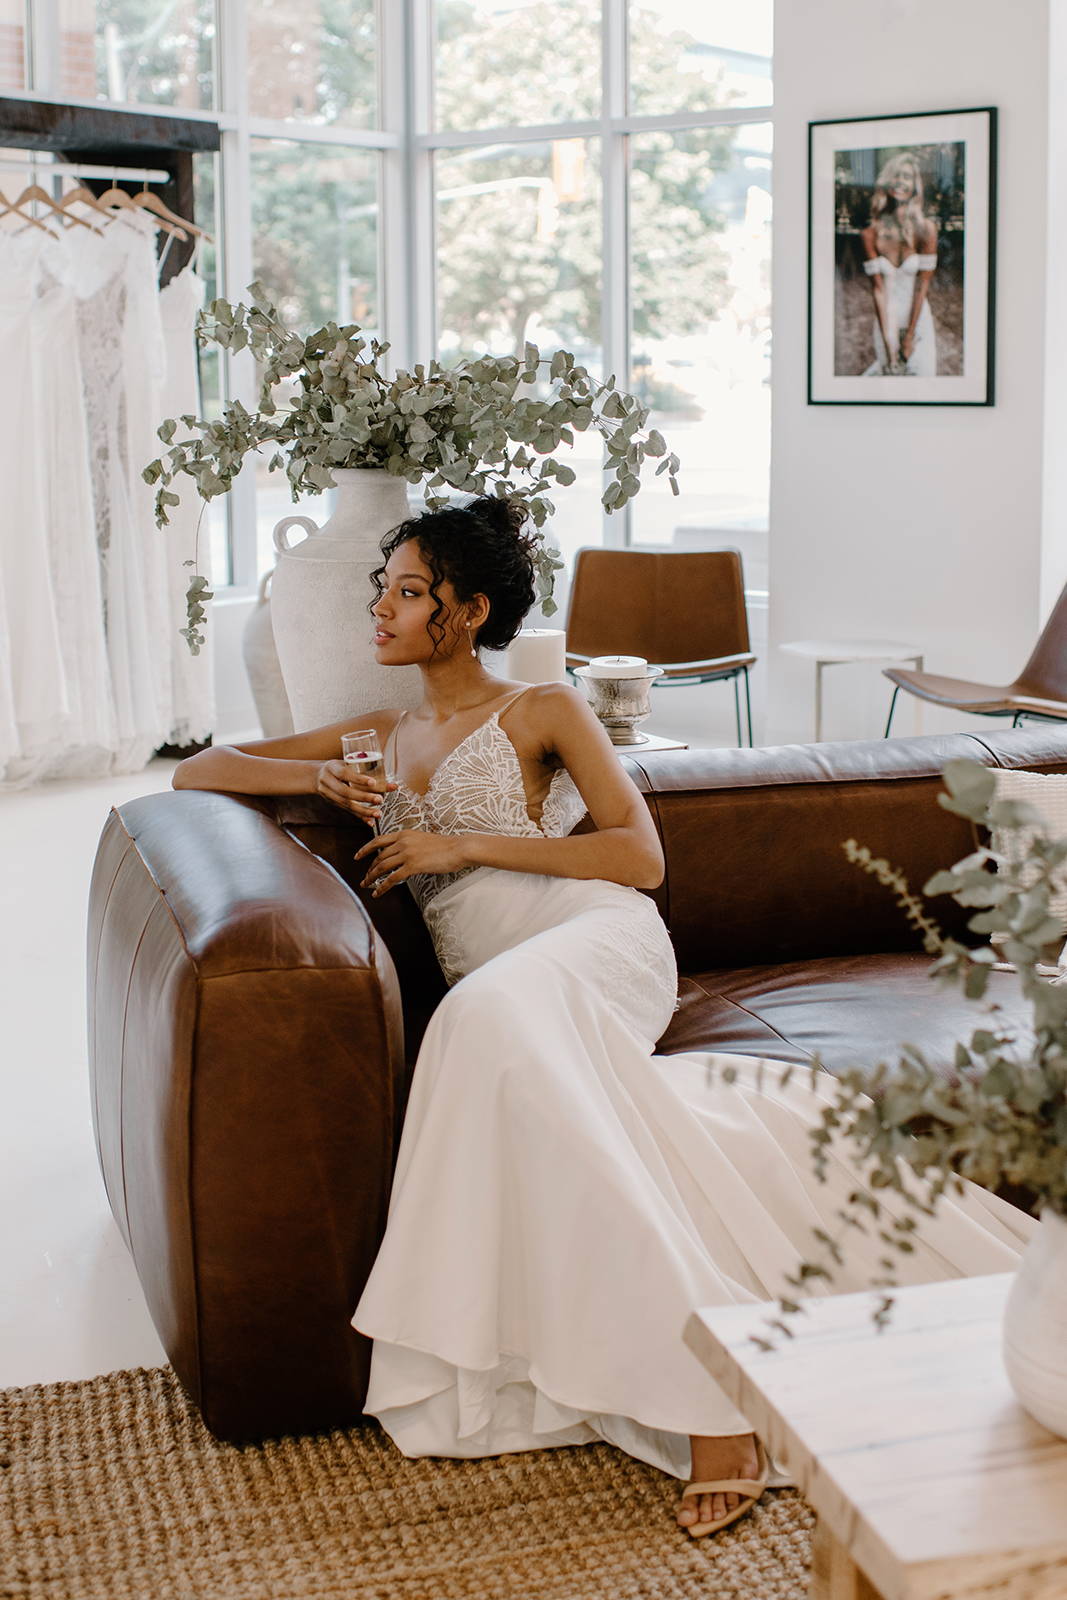 Bride sitting on the couch, sipping champagne during her bridal appointment.